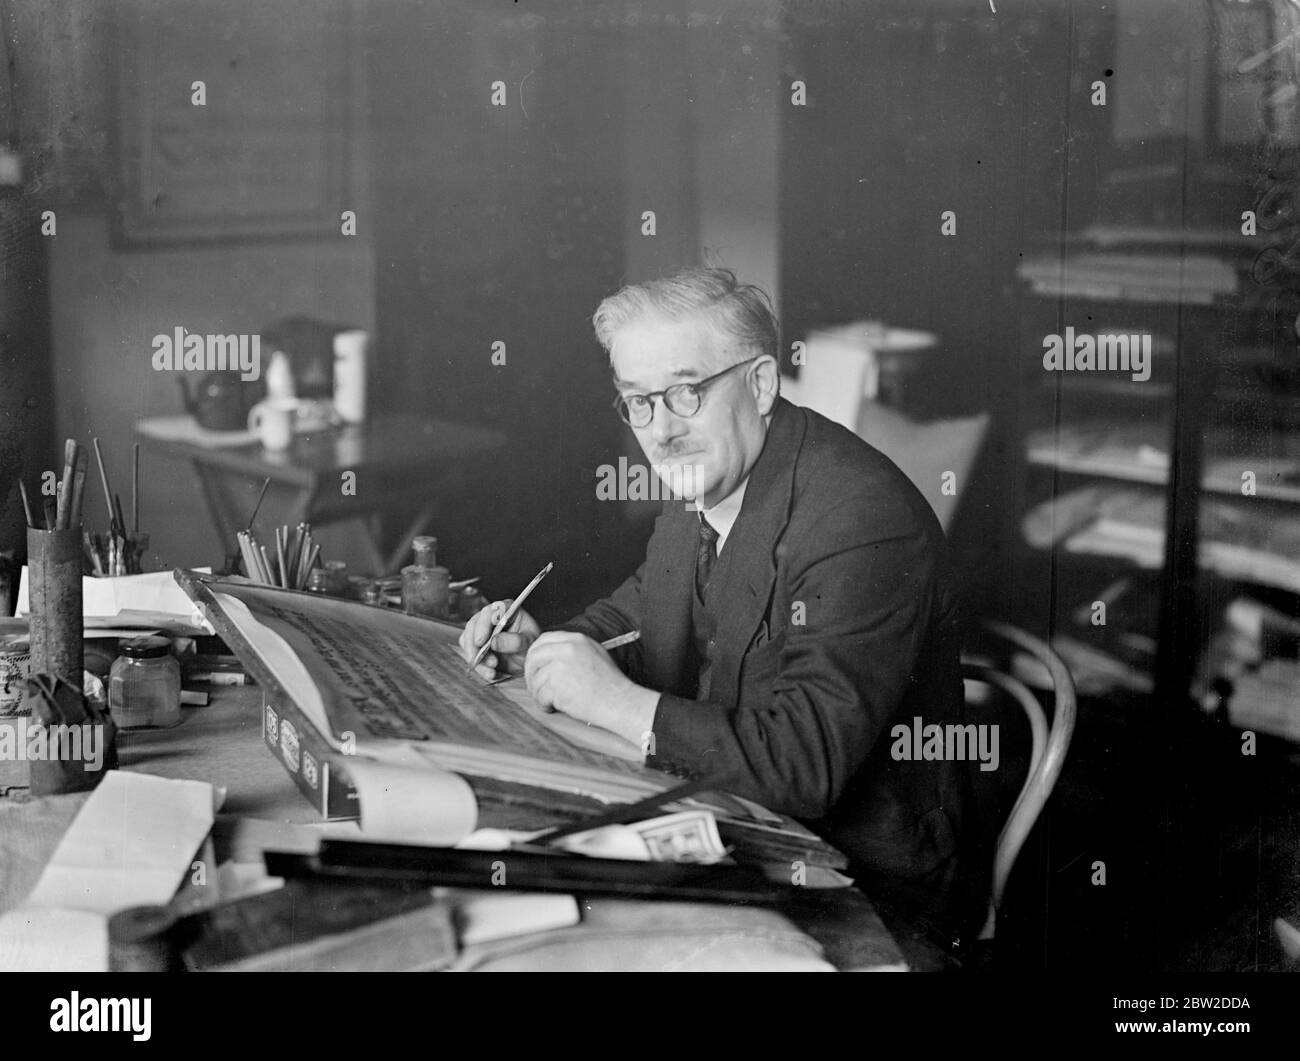 When the city of London presenters its Freedom to the Premier, Mr Neville Chamberlain, in recognition of his bid for world peace at Munich, the beautiful illuminated Scroll with will bear the beautiful handwork of Mr Henry James Mainwaring of London. Mr Mainwaring has been commissioned to write the scroll. Photo shows: Mr Henry James Mainwaring at work on a scroll in his London studio. 21 October 1938 Stock Photo